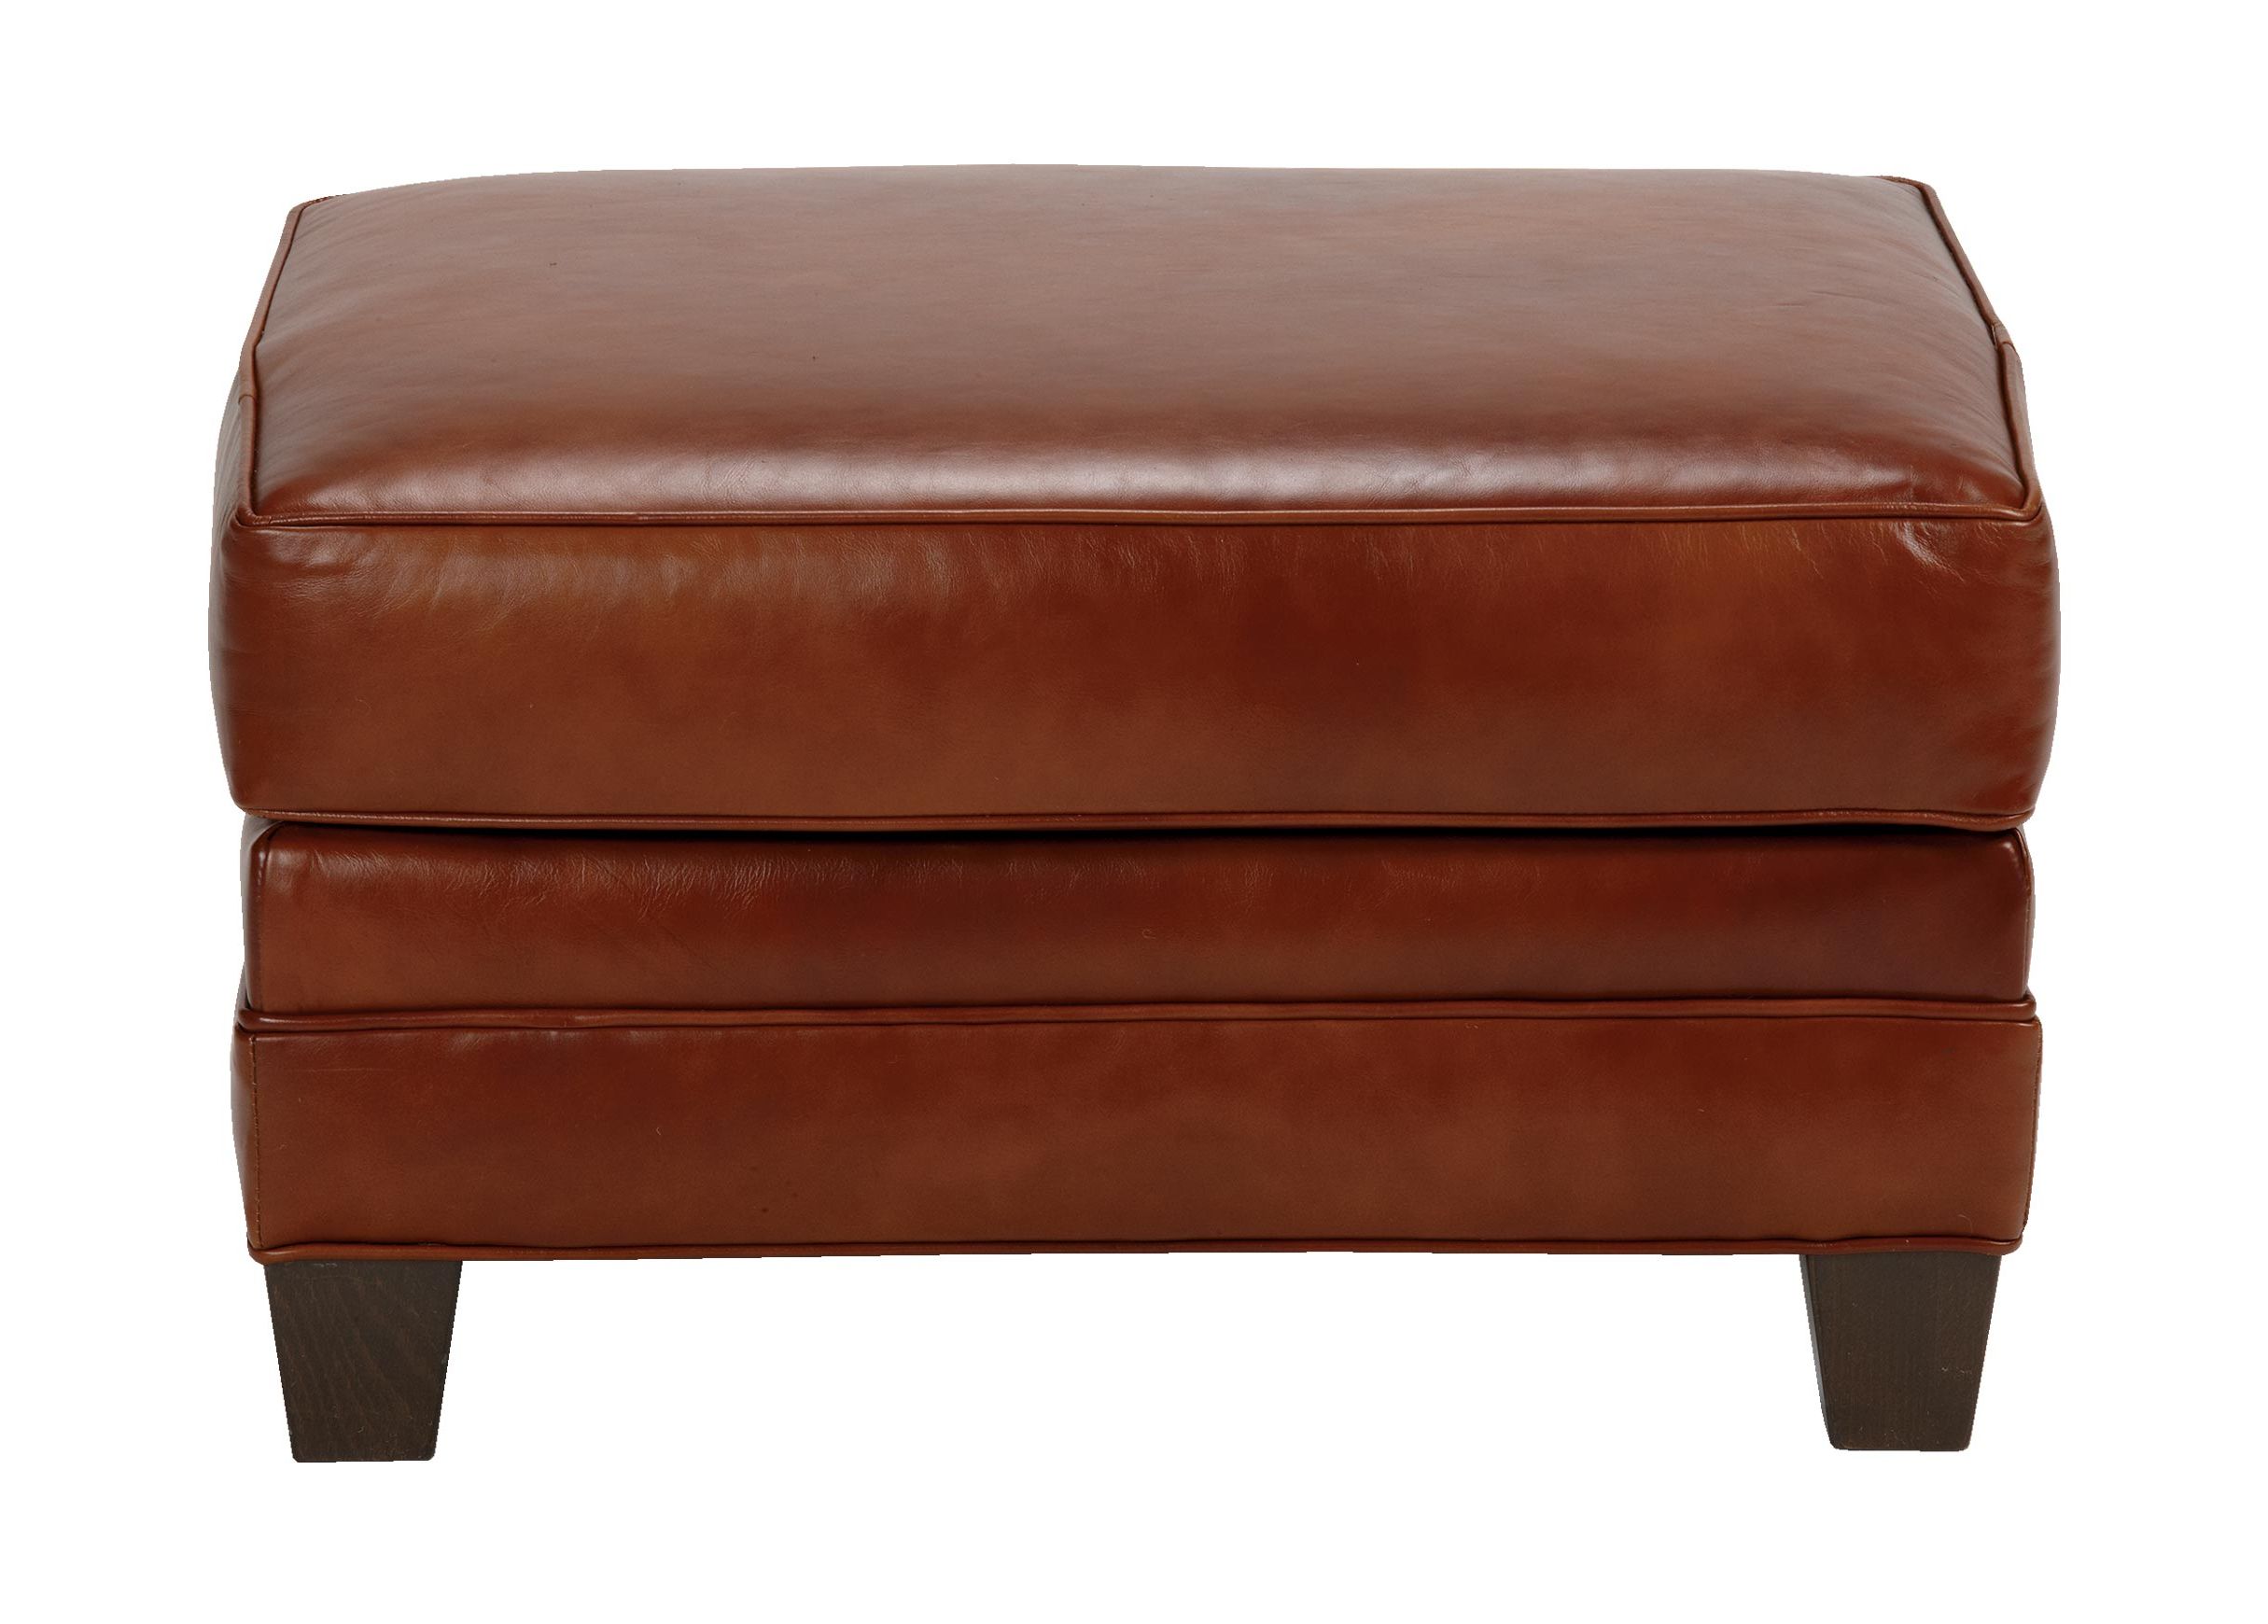 Well Known Leather Pouf Ottomans Regarding Dean Leather Ottoman (View 10 of 10)